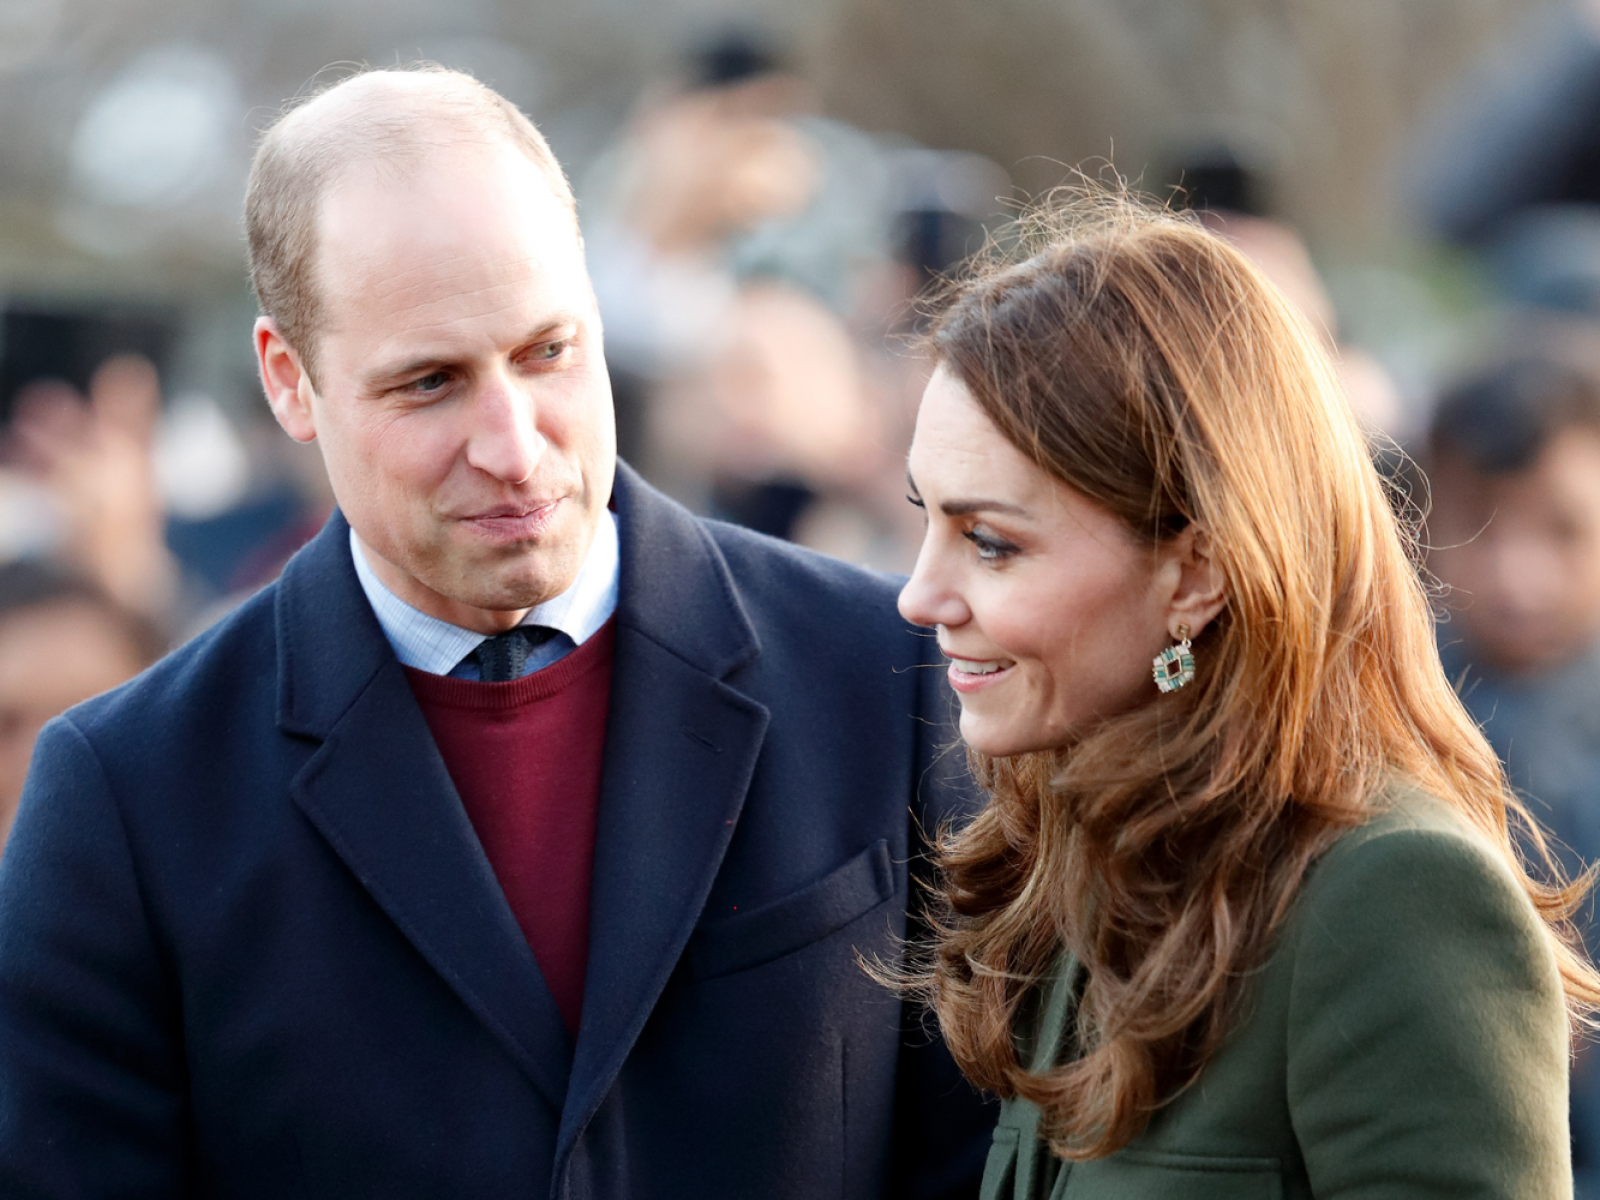 Kate Middleton and Prince William PDA Moments Go Viral on TikTok